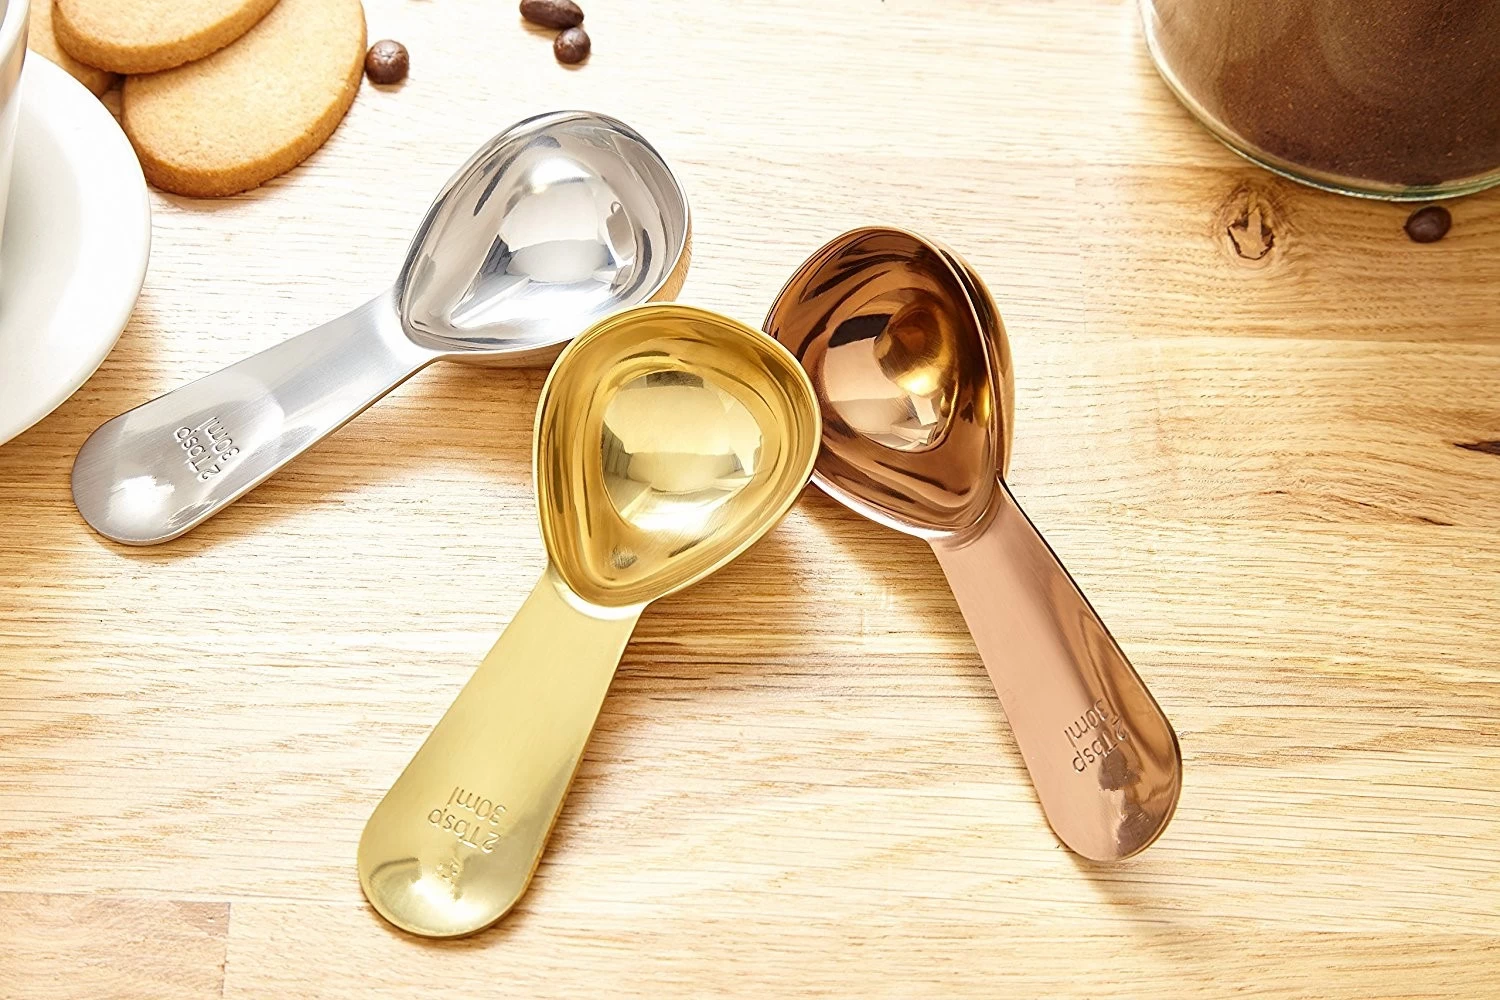 Stainless Steel coffee spoon manufacturer china china Stainless Steel coffee tamper factory Stainless Steel coffee tamper suppliers china